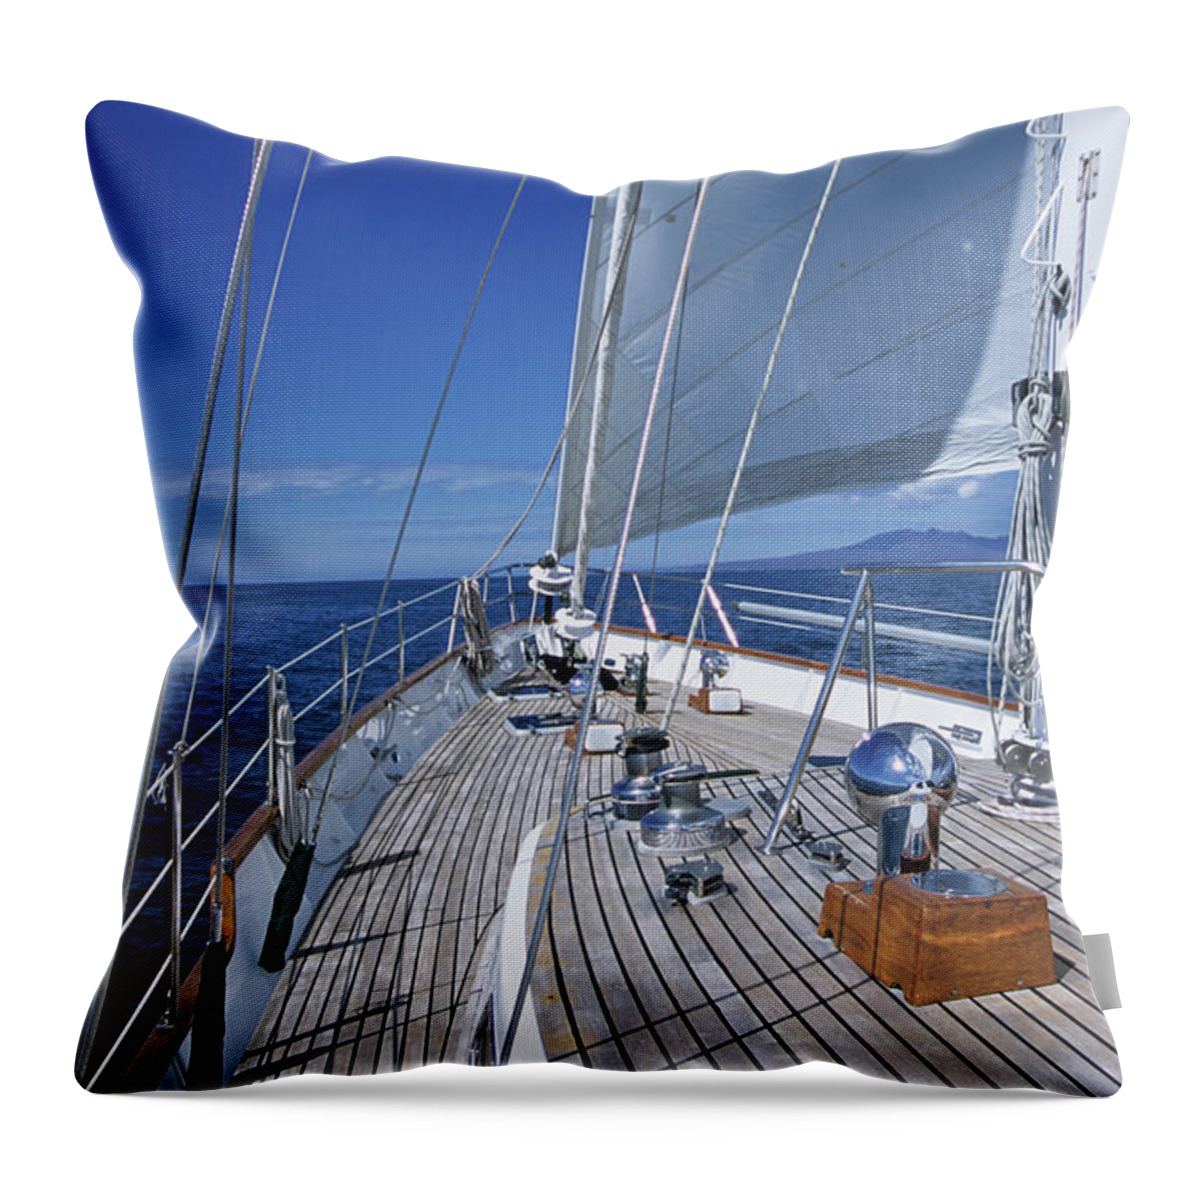 On Board Throw Pillow featuring the photograph On Deck off Mexico by David J Shuler